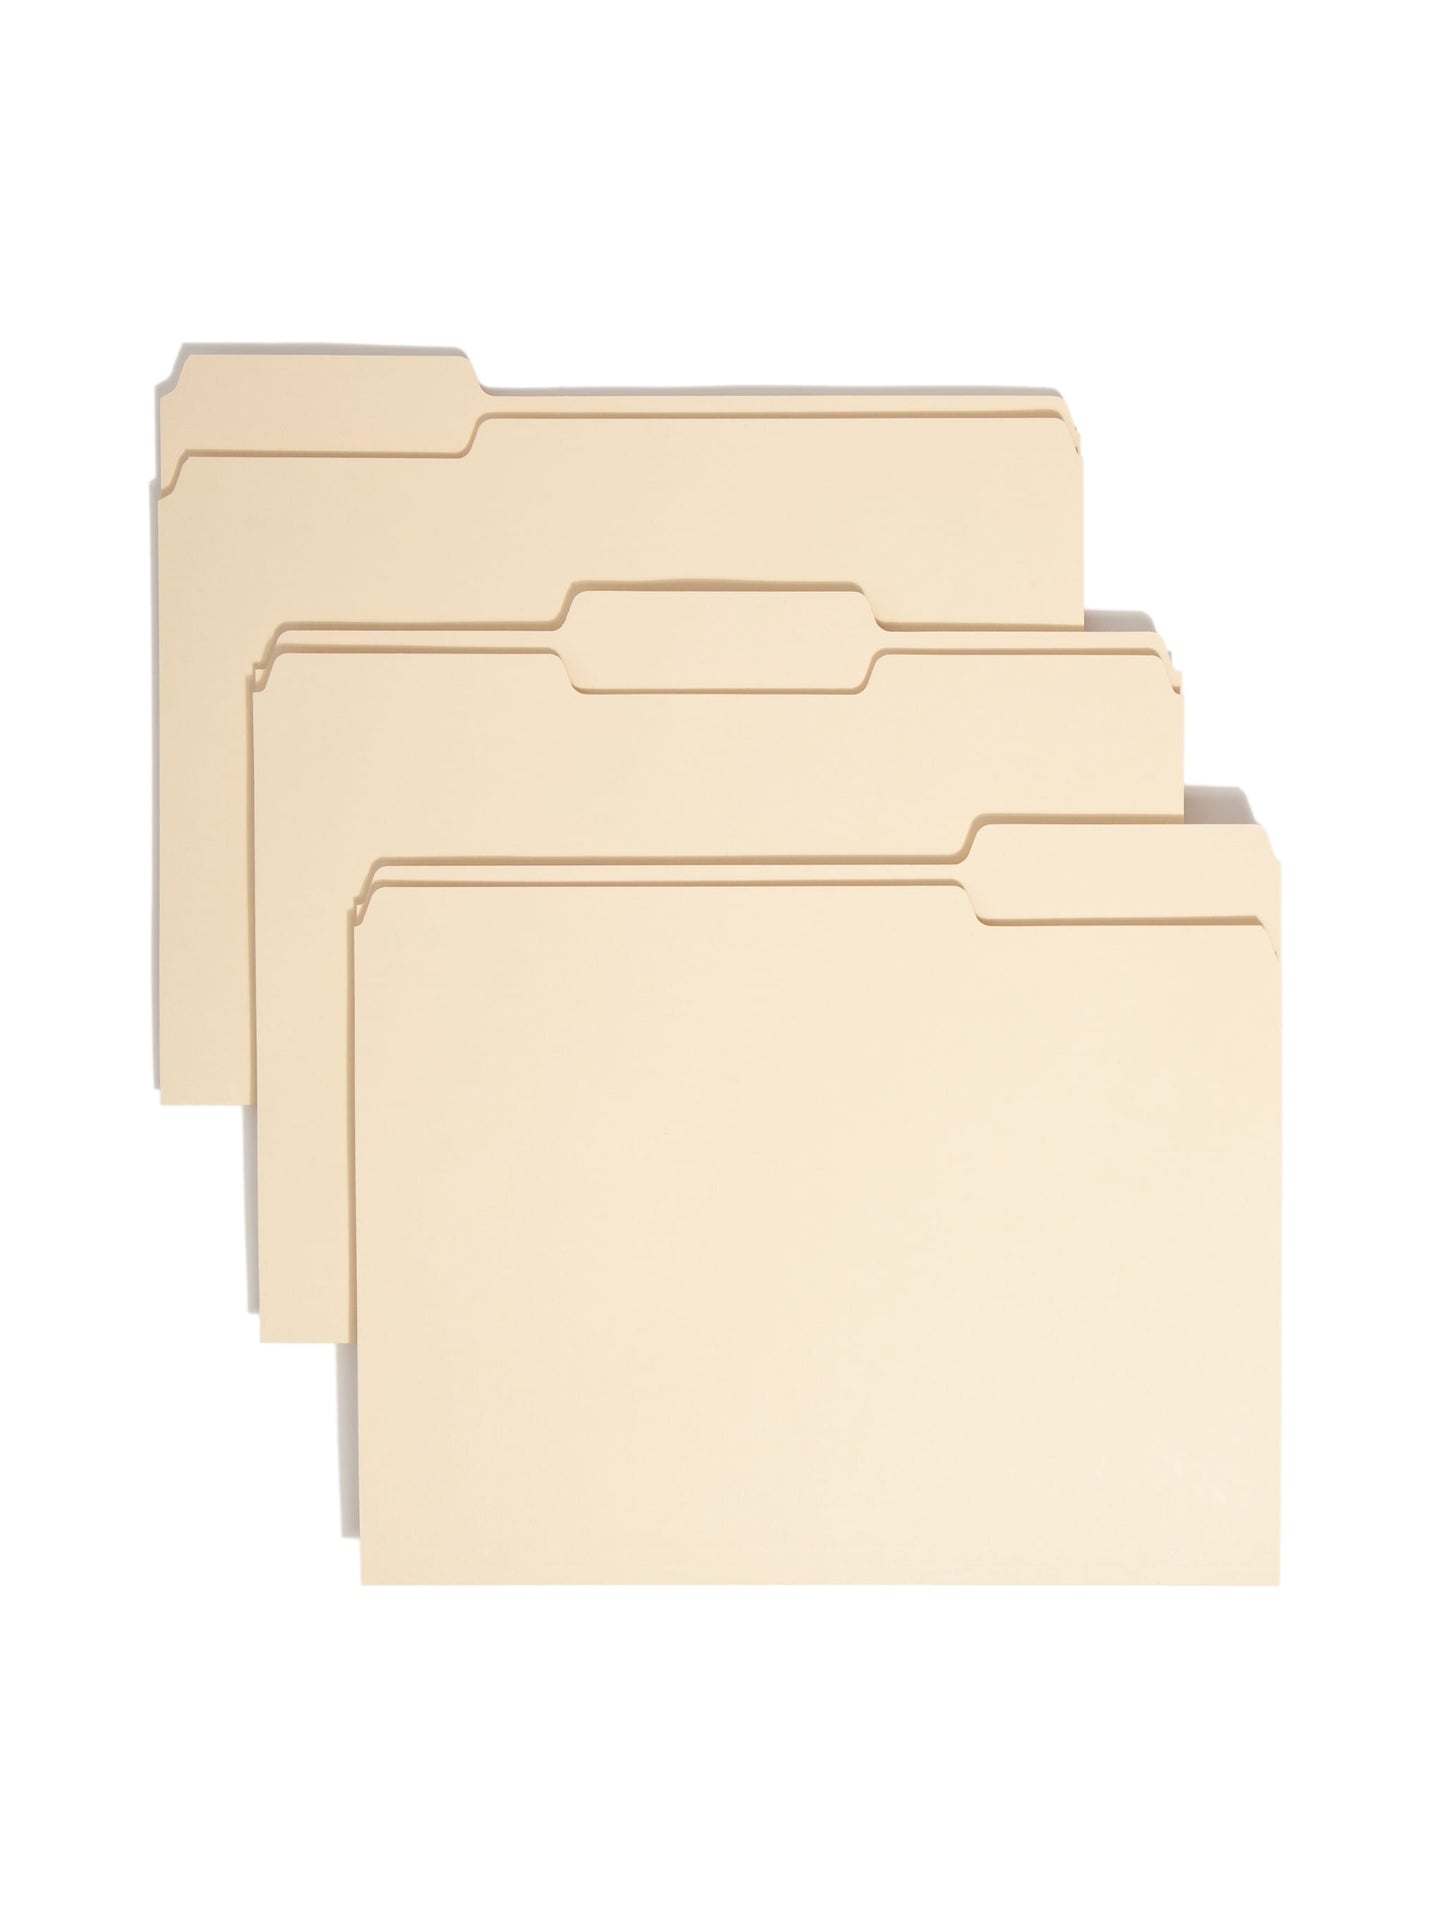 100% Recycled File Folders, Manila Color, Letter Size, Set of 100, 086486103398